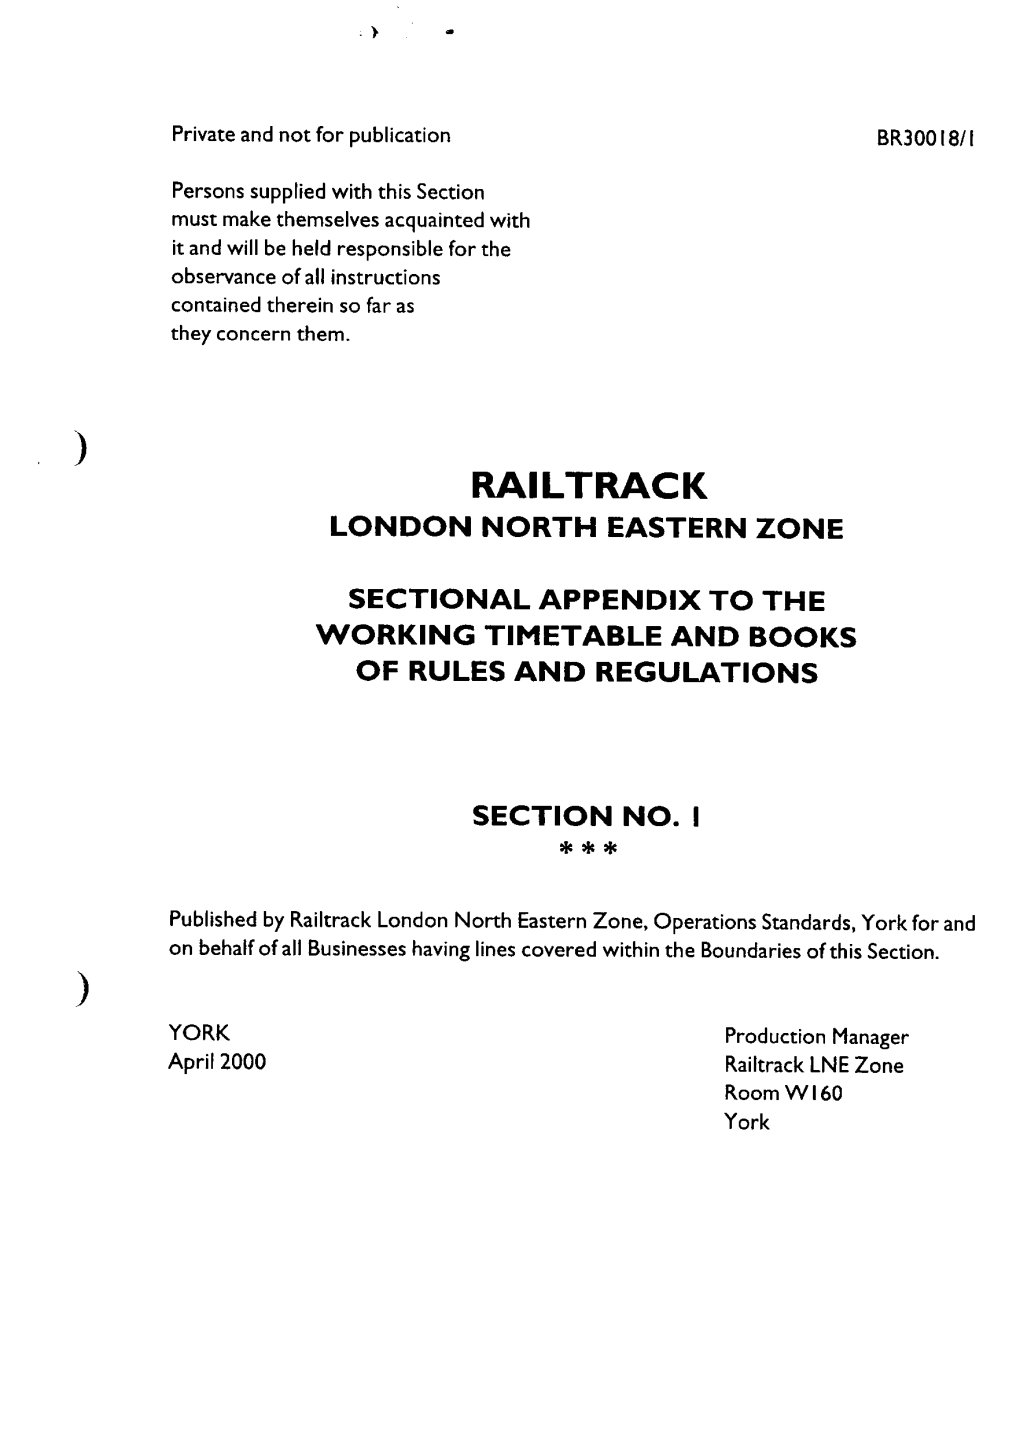 Railtrack London North Eastern Zone, Operations Standards, York for and on Behalf of All Businesses Having Lines Covered Within the Boundaries of This Section